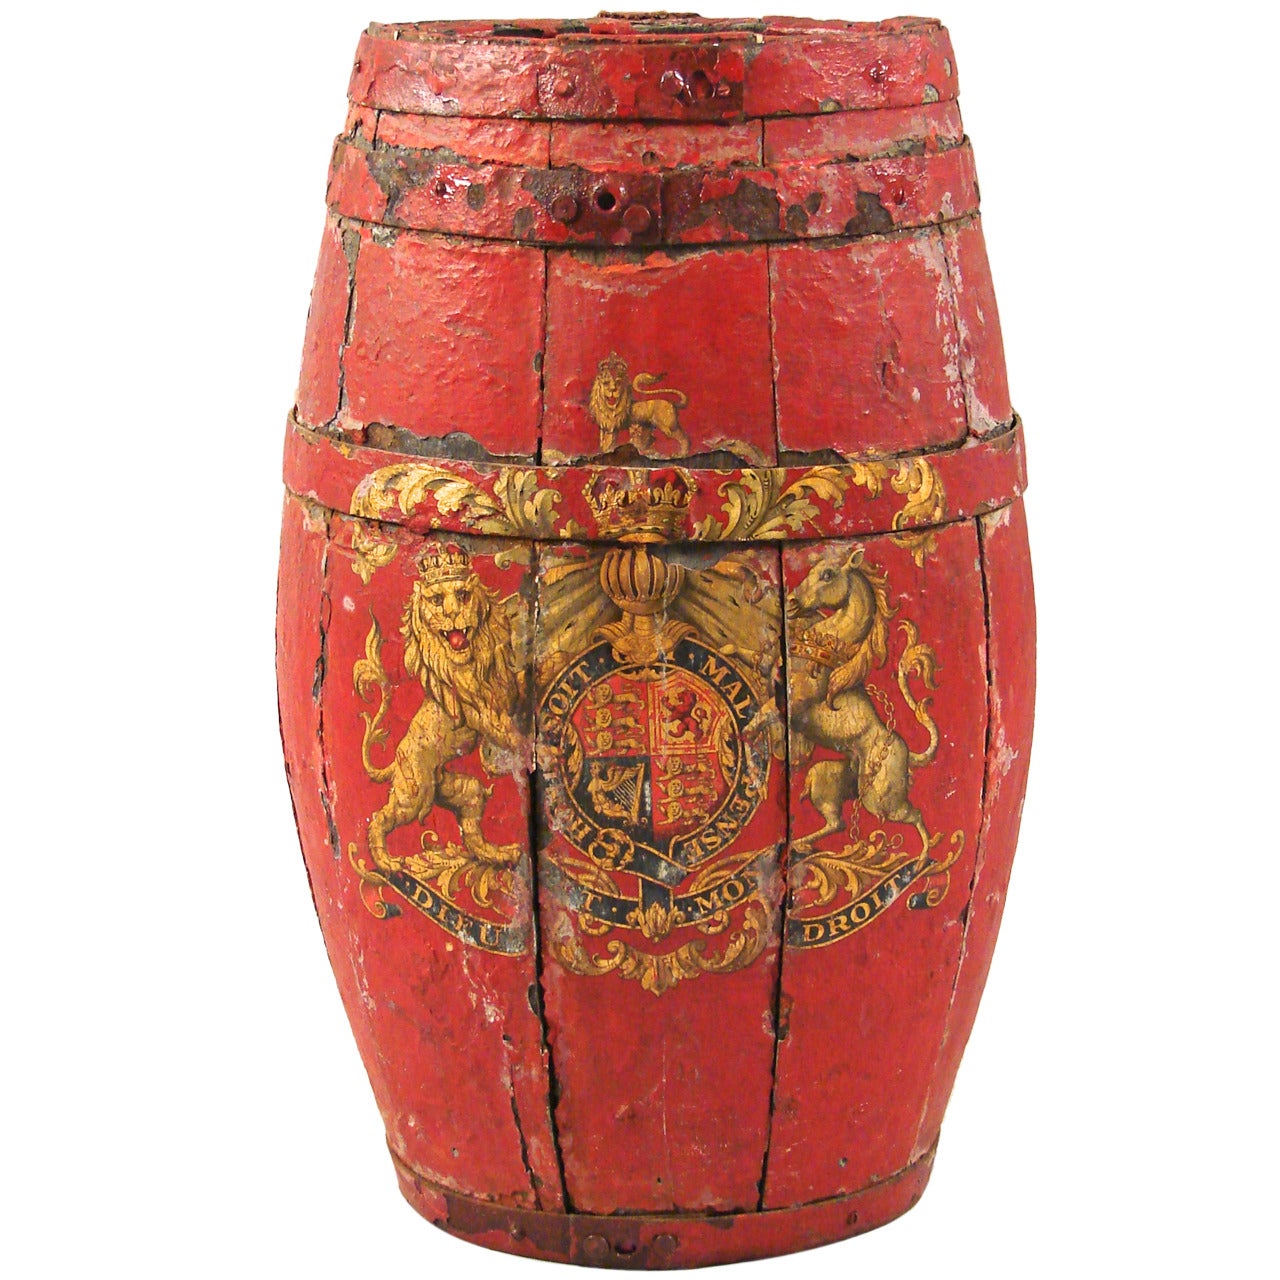 Painted English Barrel with English Coat of Arms